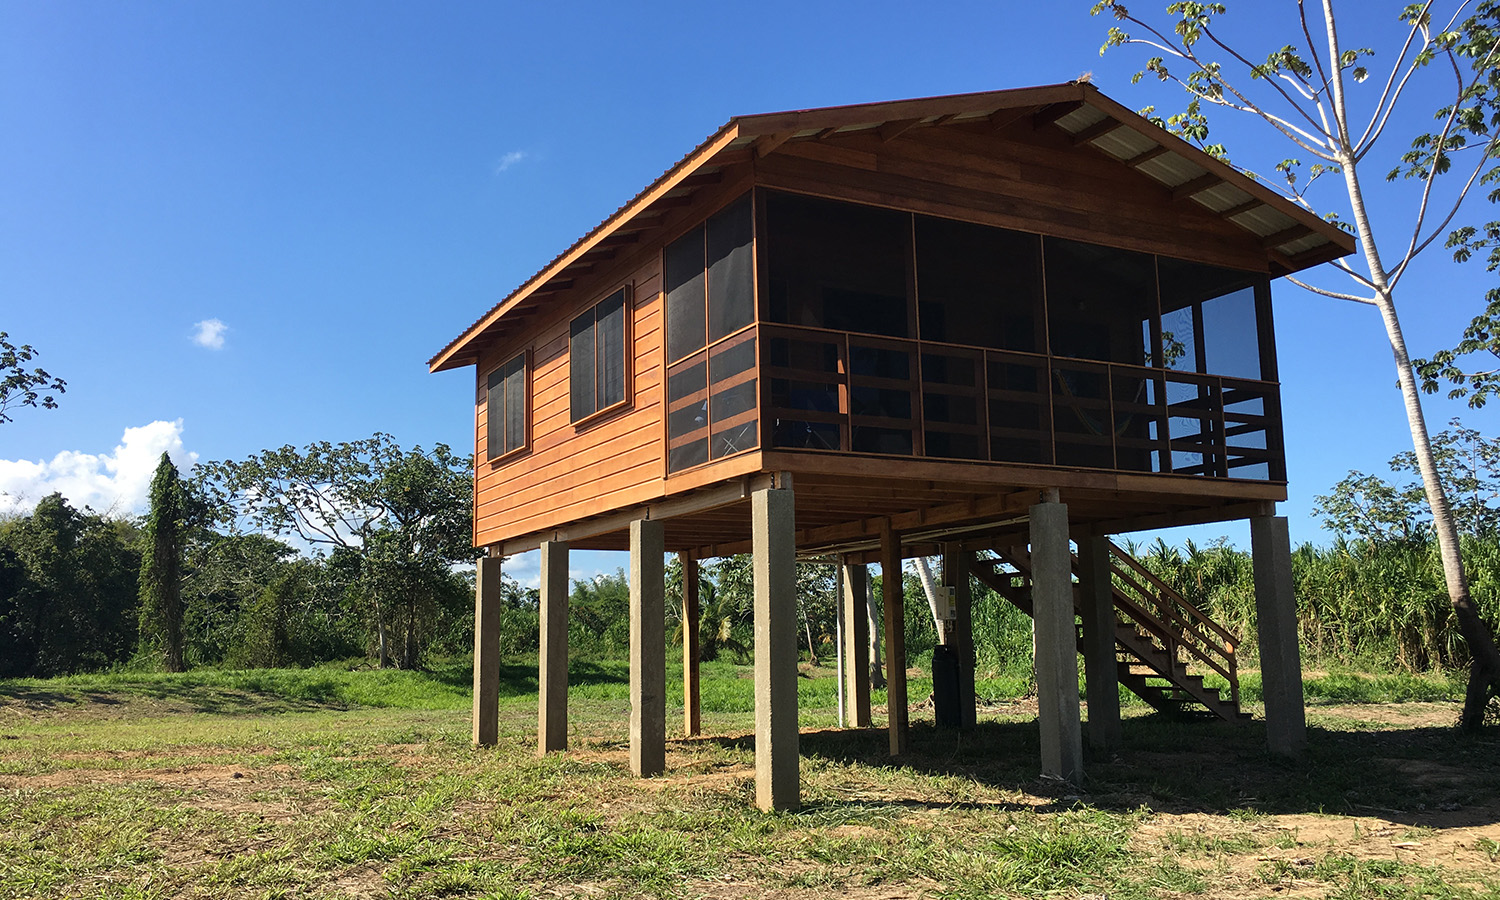 Looking for a home for sale in Belize? Many styles of home are available, from the modern to the traditional belize cabin. Explore all of the options here!